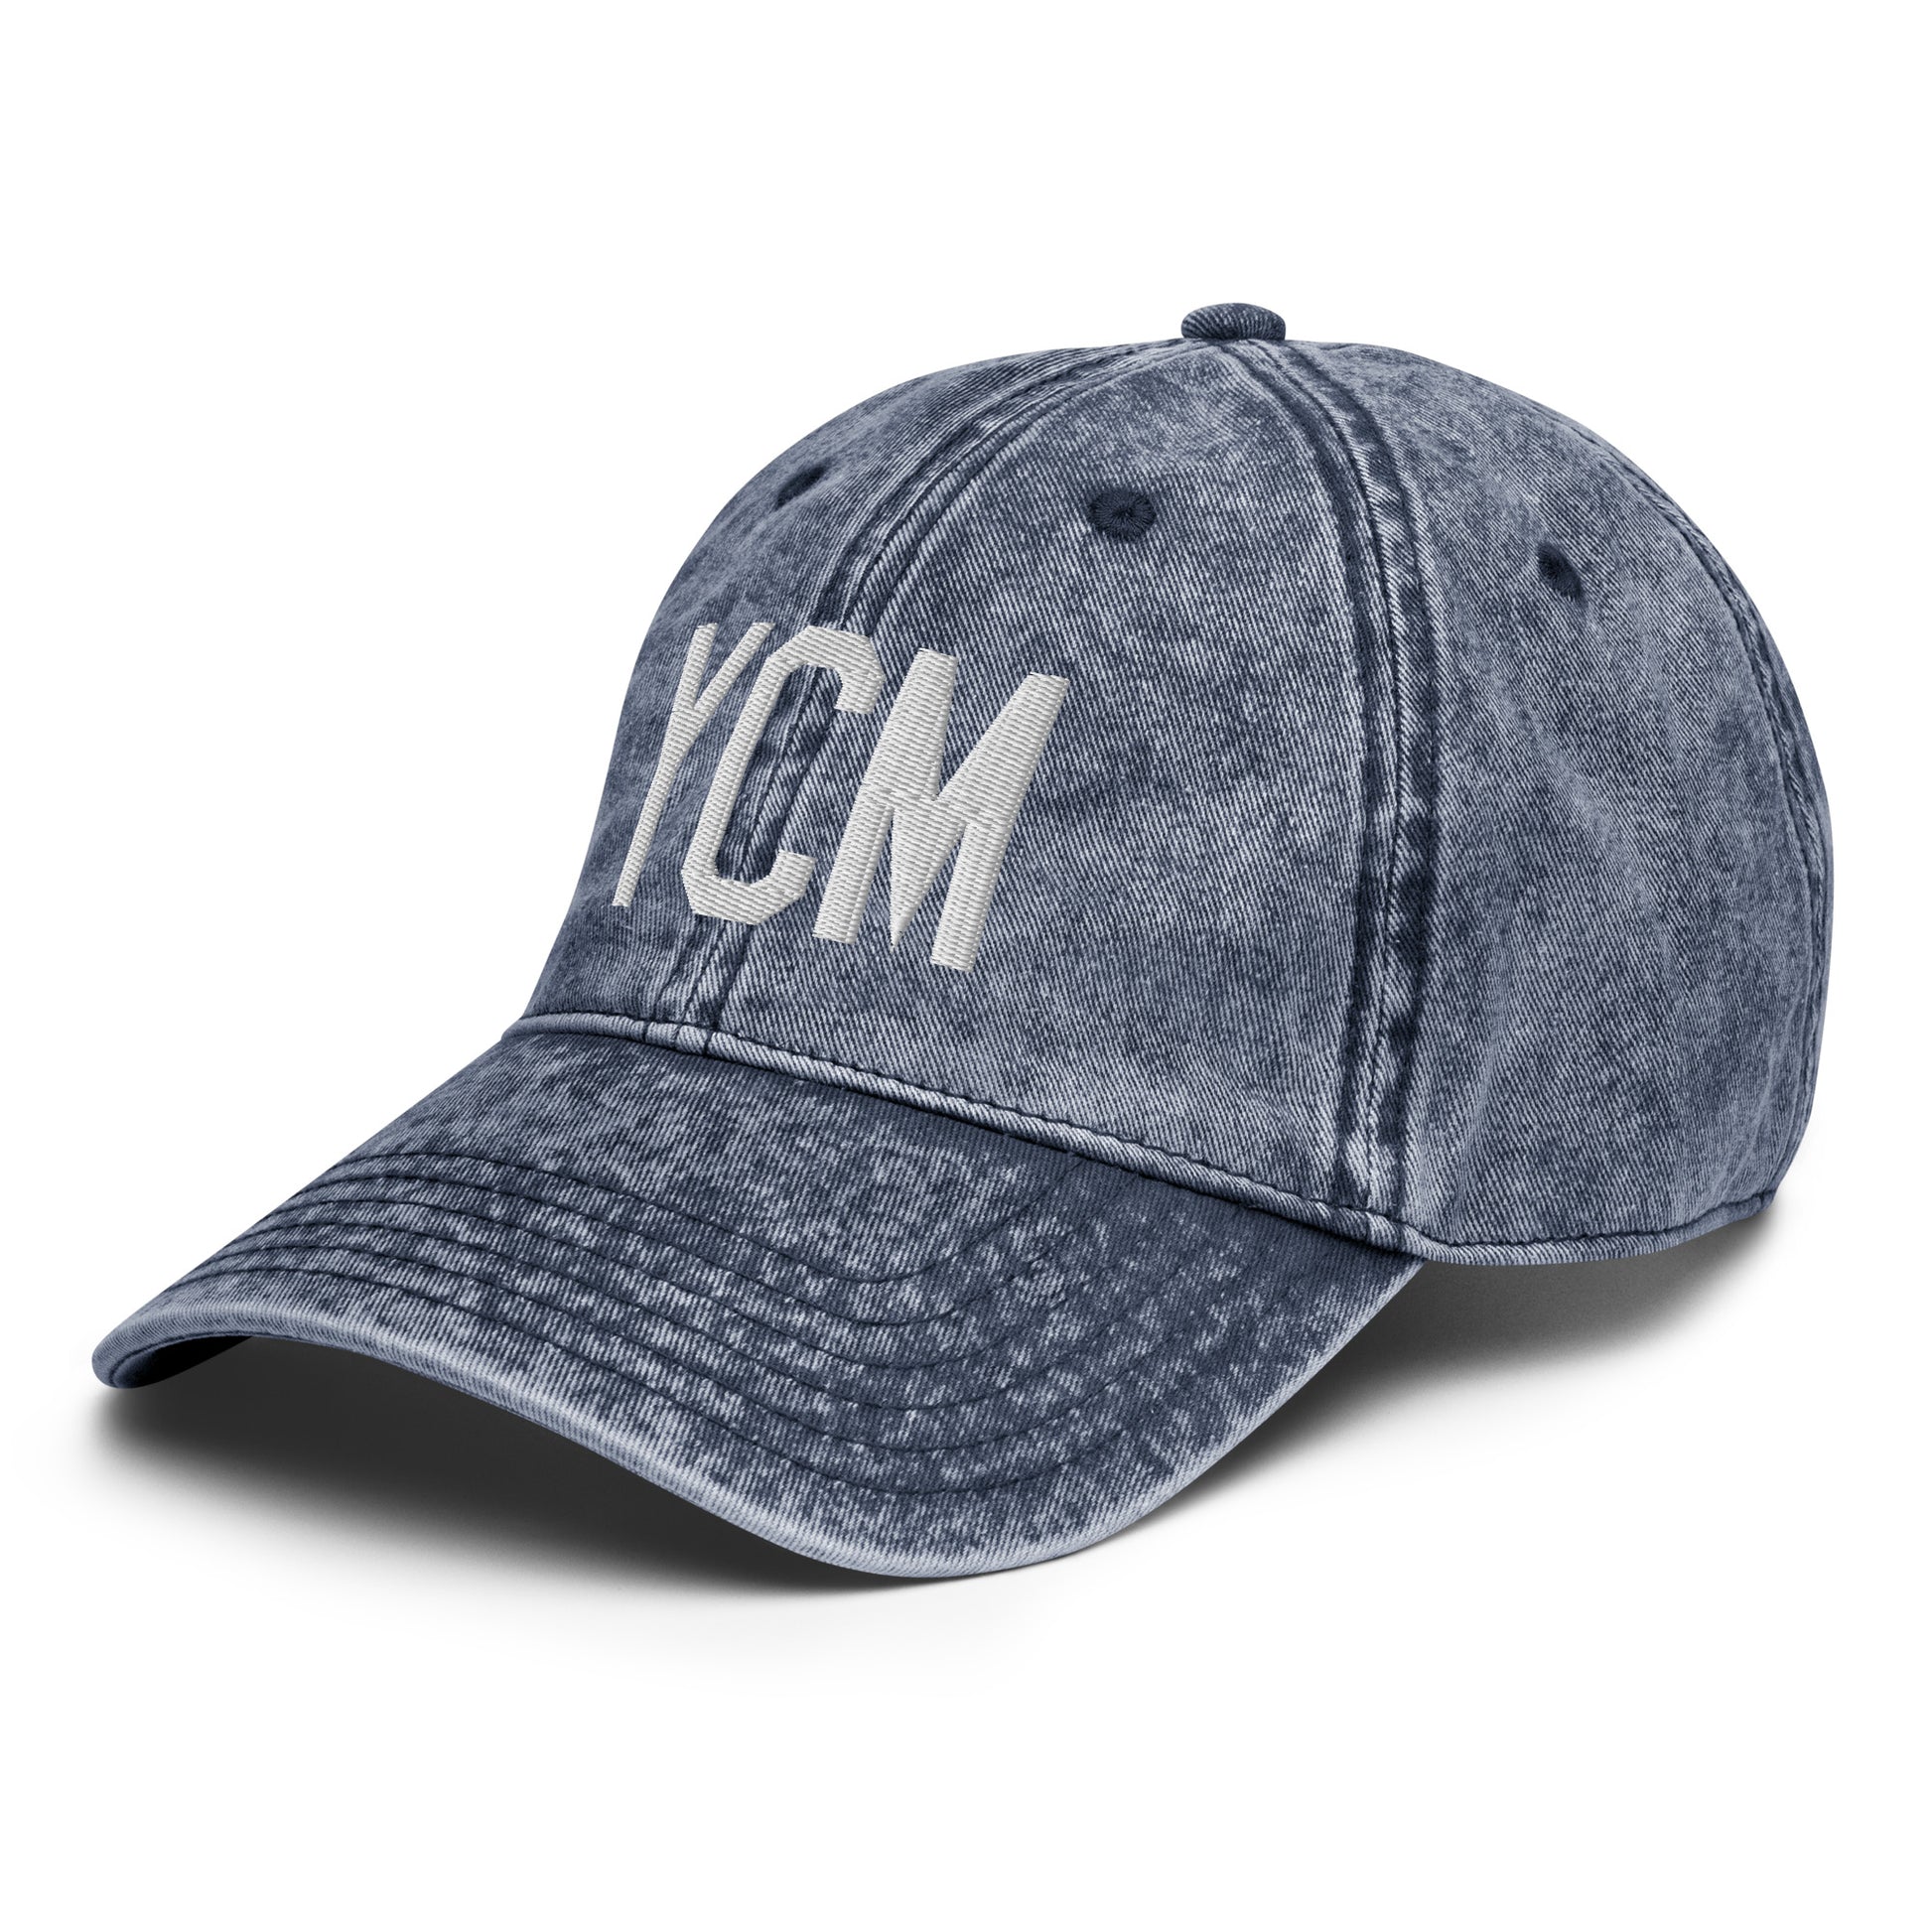 Airport Code Twill Cap - White • YCM St. Catharines • YHM Designs - Image 17